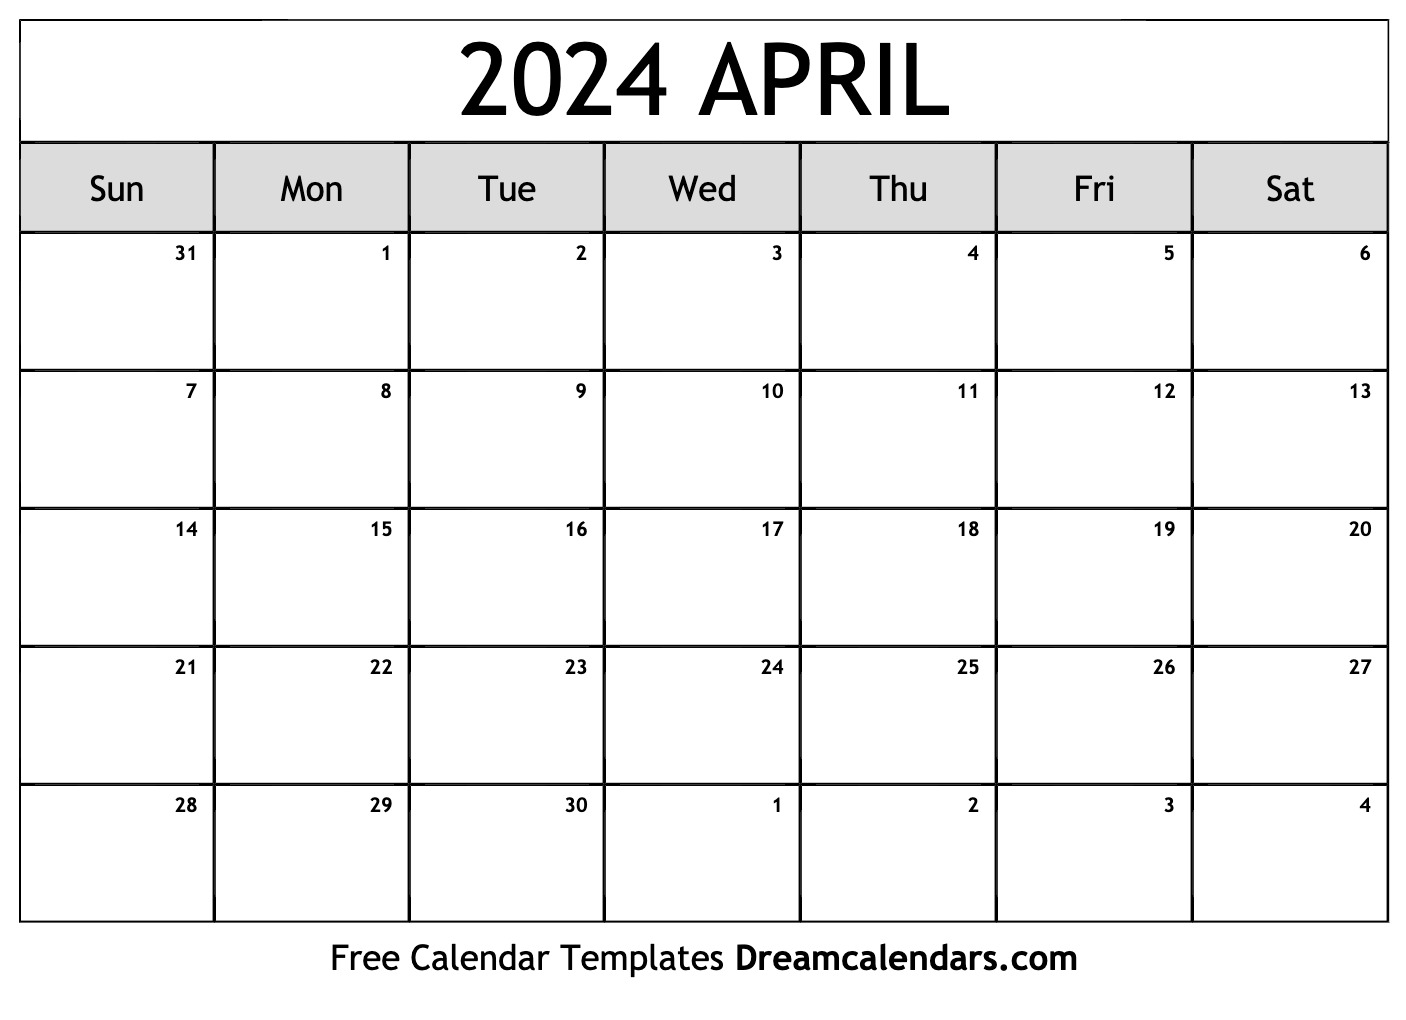 April 2024 Calendar - Free Printable with Holidays and Observances